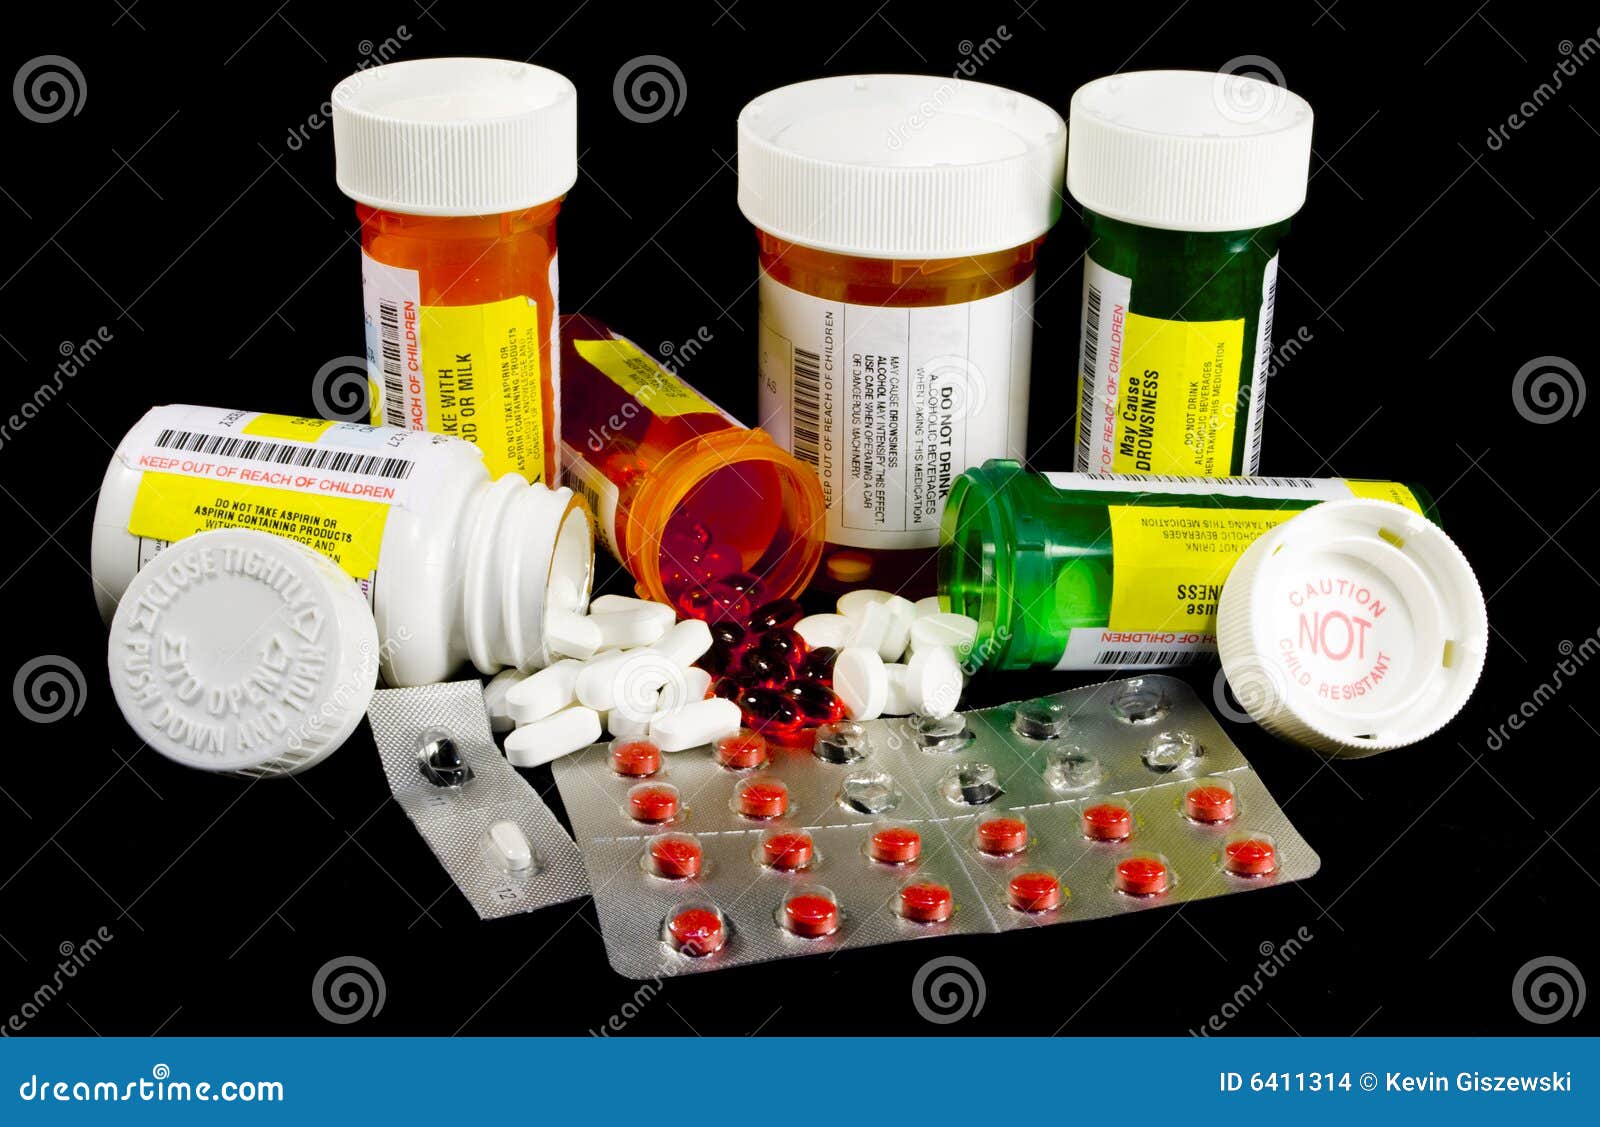 various-medicines-and-narcotics-stock-images-image-6411314